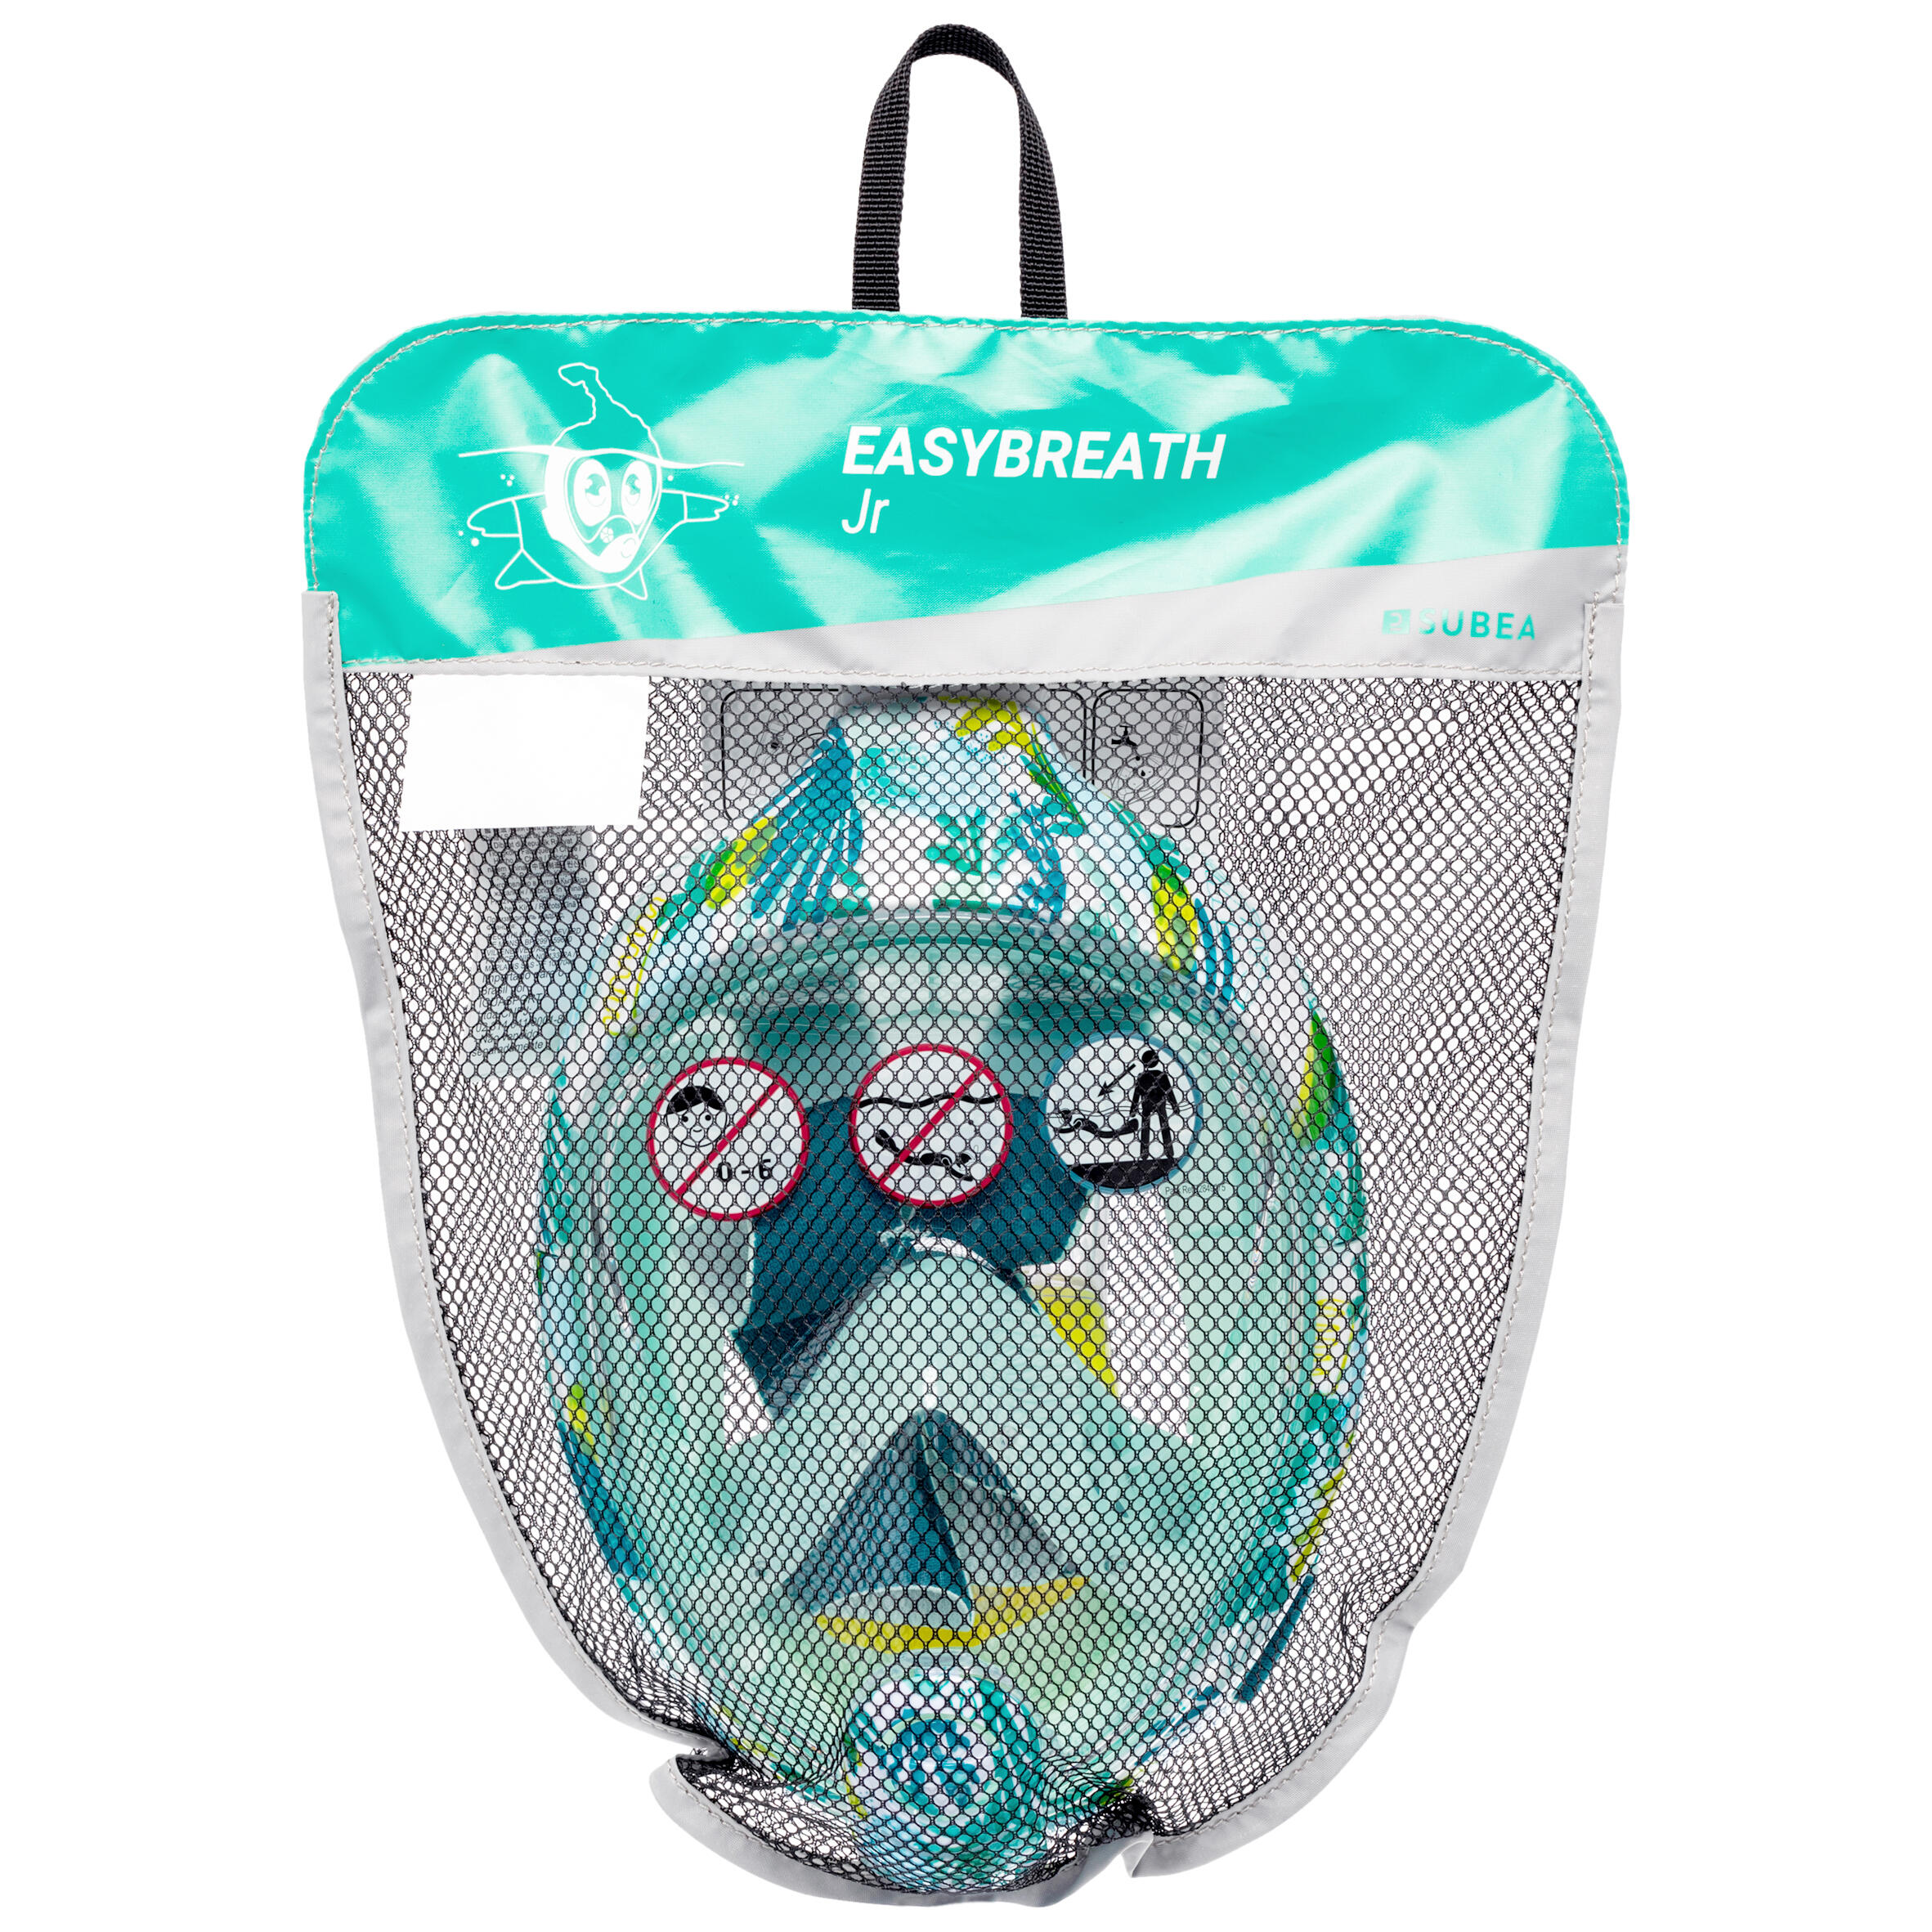 Kids Easybreath Surface Mask XS (6-10 years) - Coral White 6/7